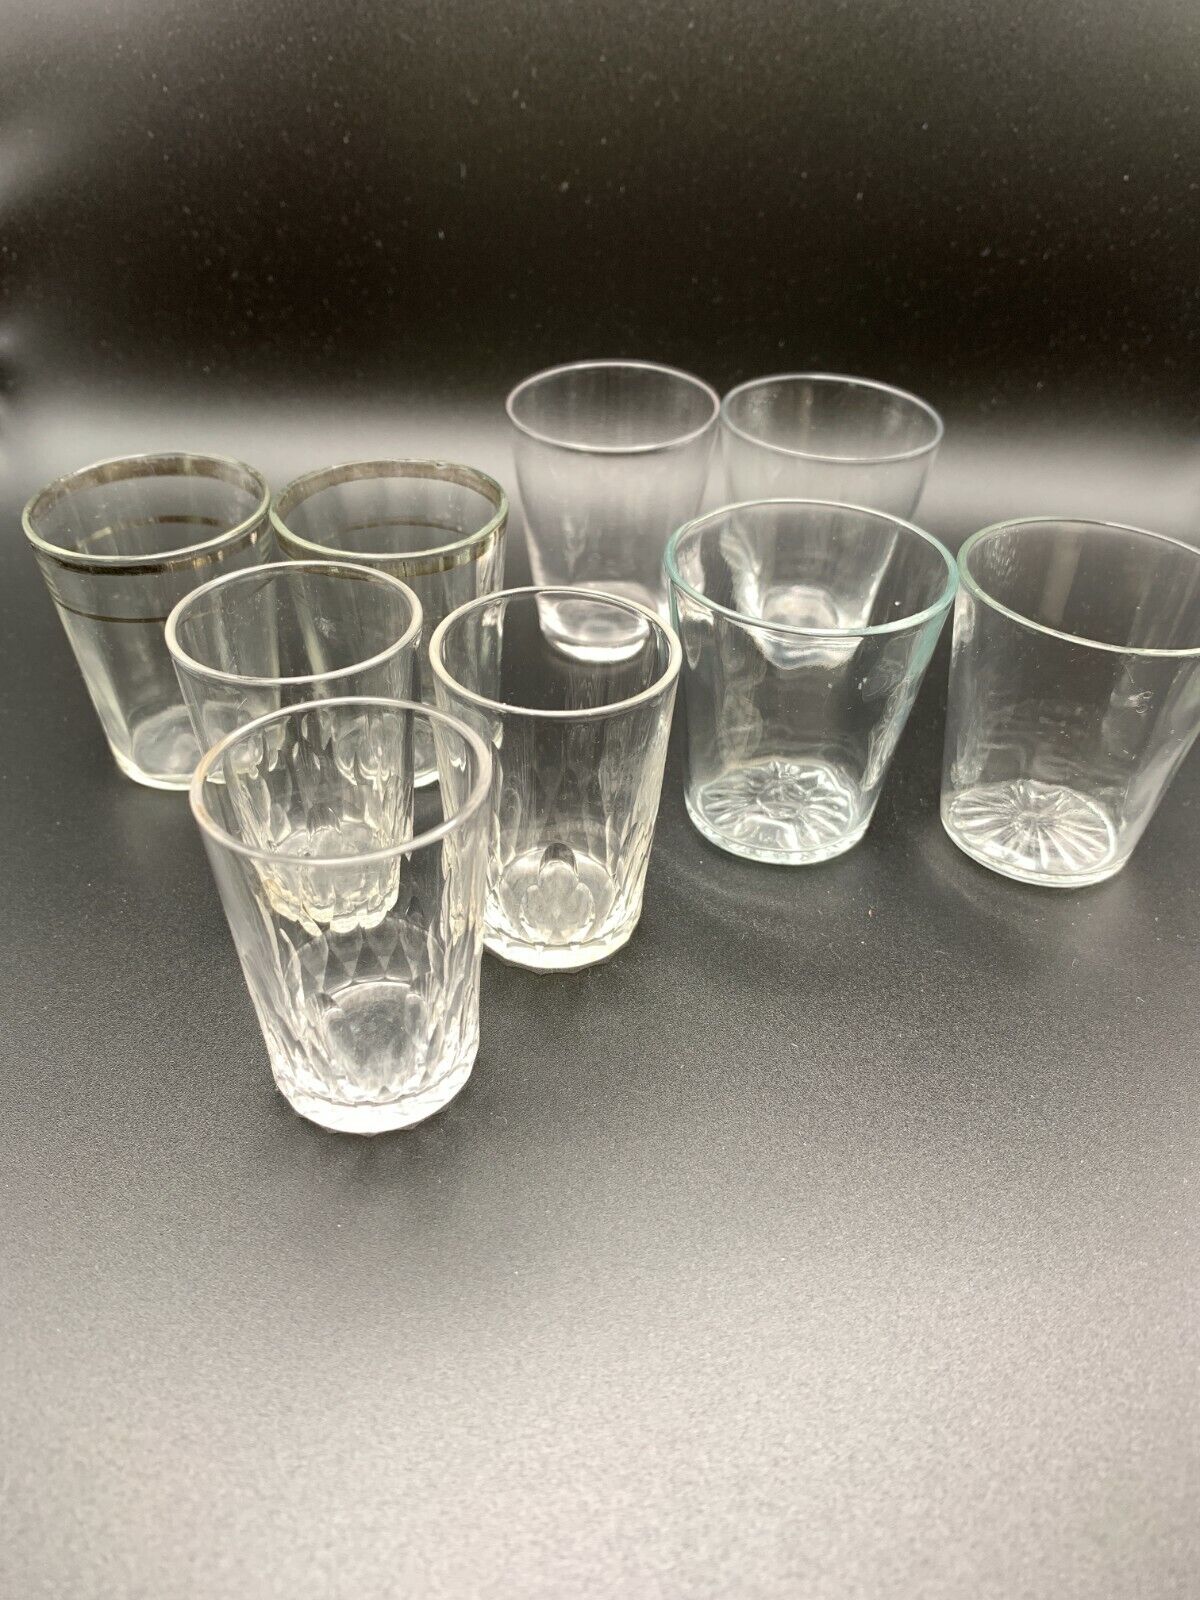 Antique clear glass 9 shot glasses clear glass assortment fine cut some crystal